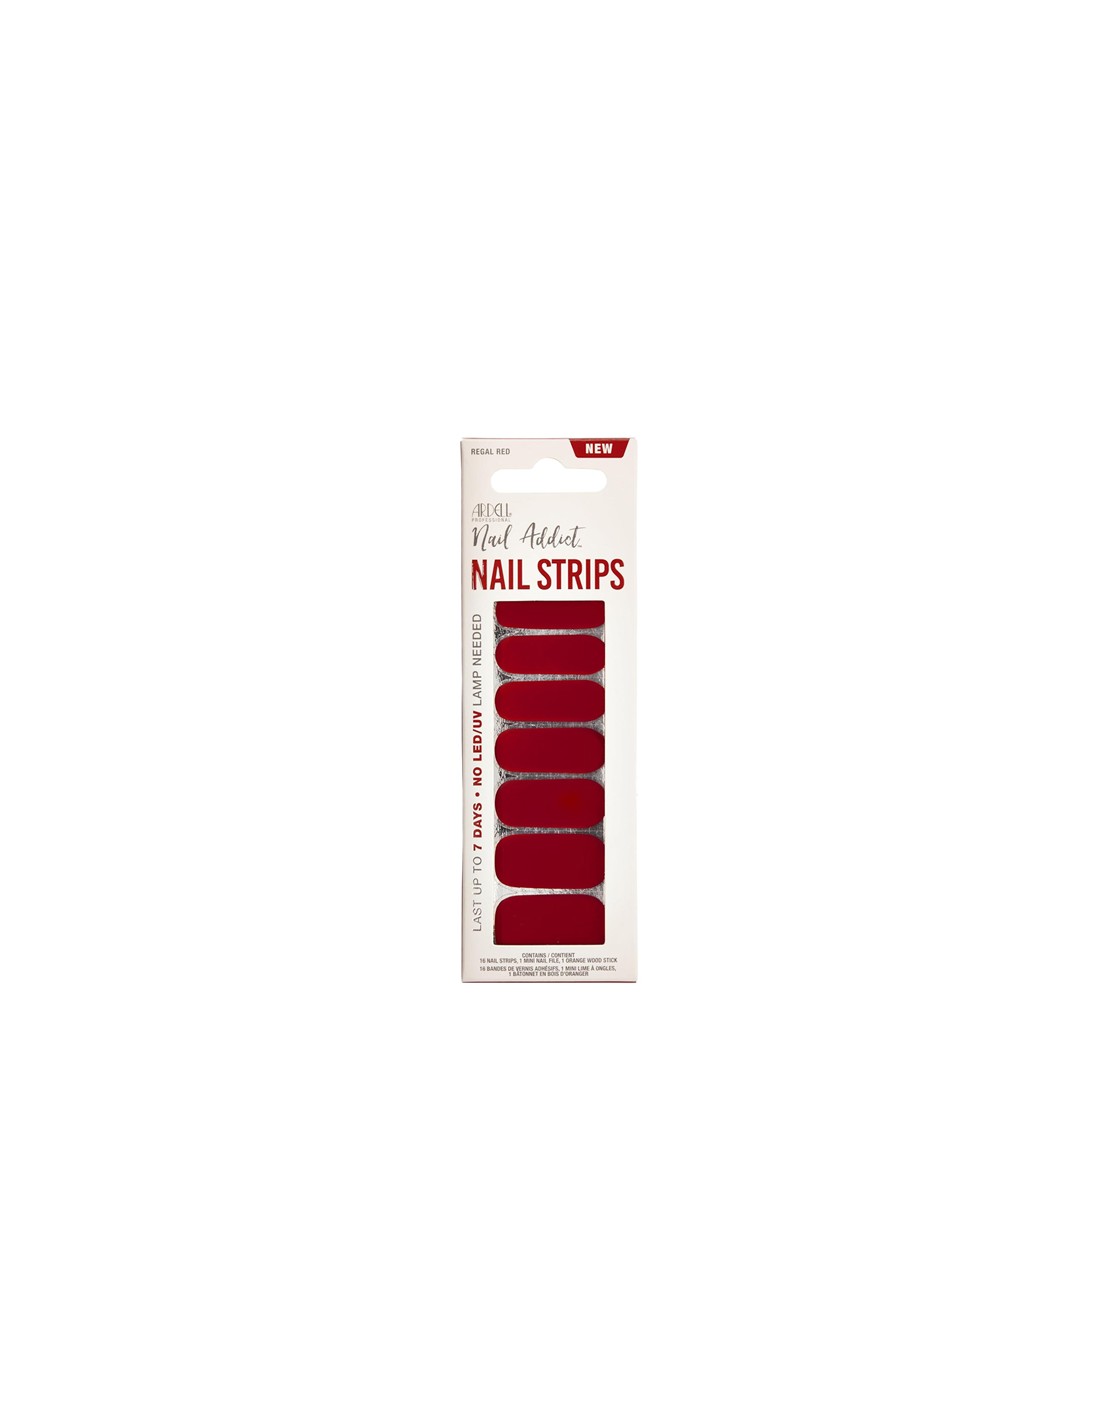 Ardell Nail Addict Nail Strips Regal Red